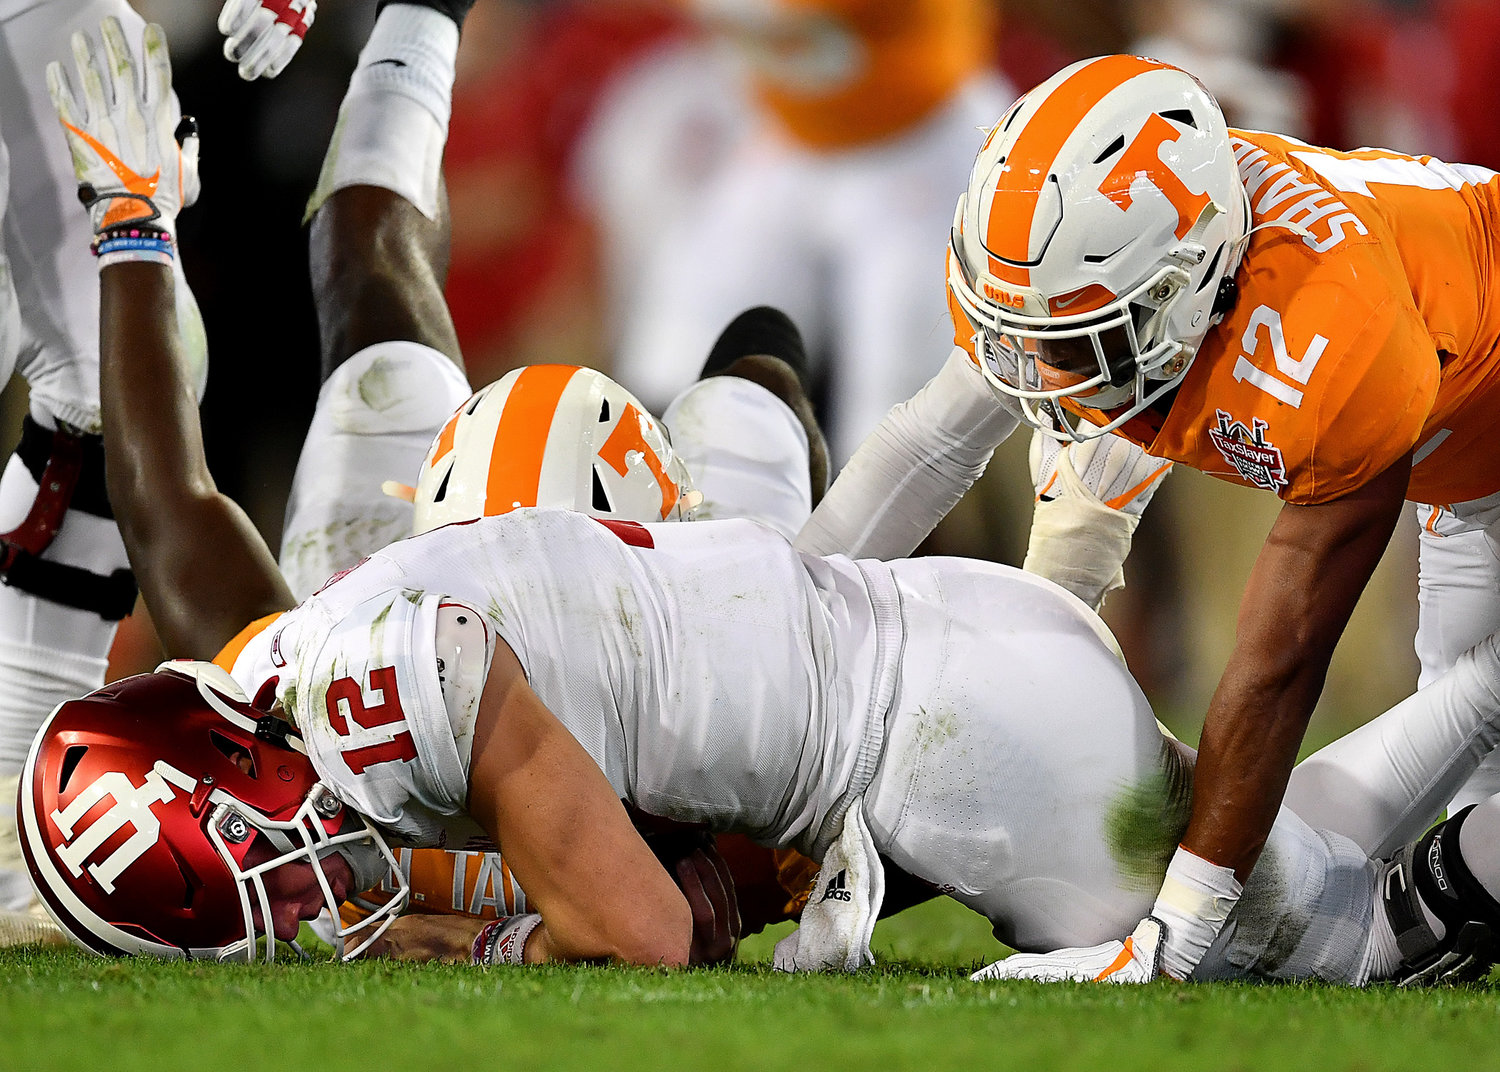 Tennessee Volunteers defensive back Shawn Shamburger (12) sacks Indiana Hoosiers quarterback Peyton Ramsey (12) in the first half of the Gator Bowl NCAA football game Thursday, January 2, 2020, at TIAA Bank Field in Jacksonville, Fla.